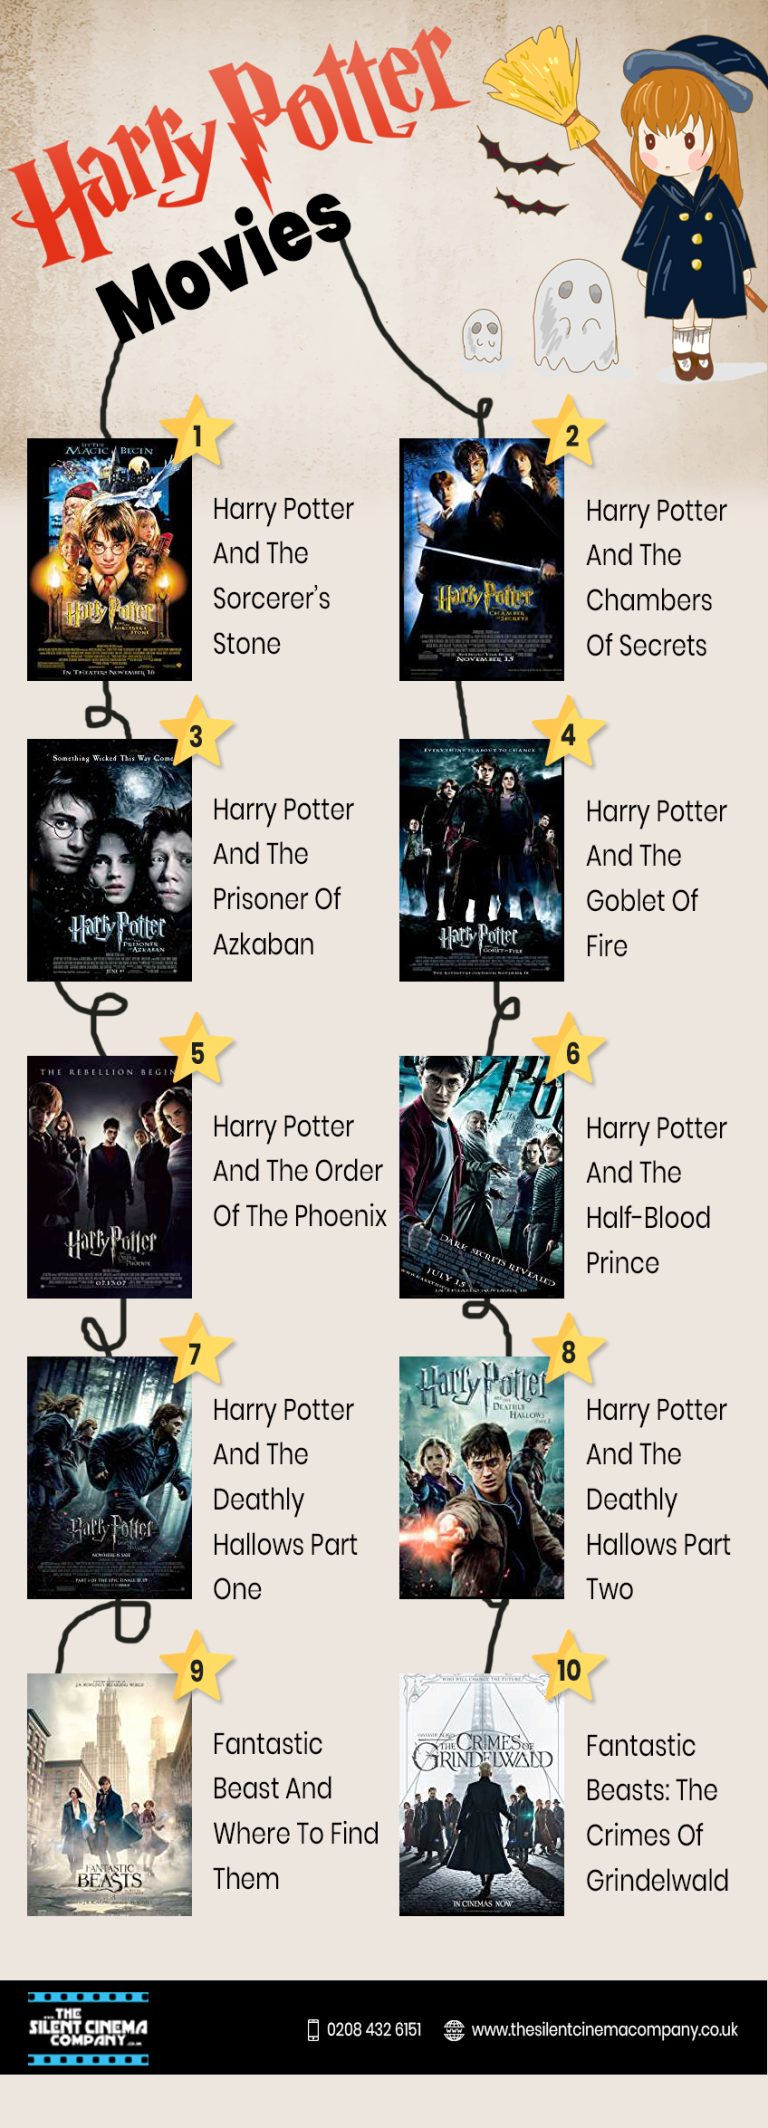 Harry Potter Movies: A Must-Watch Guide